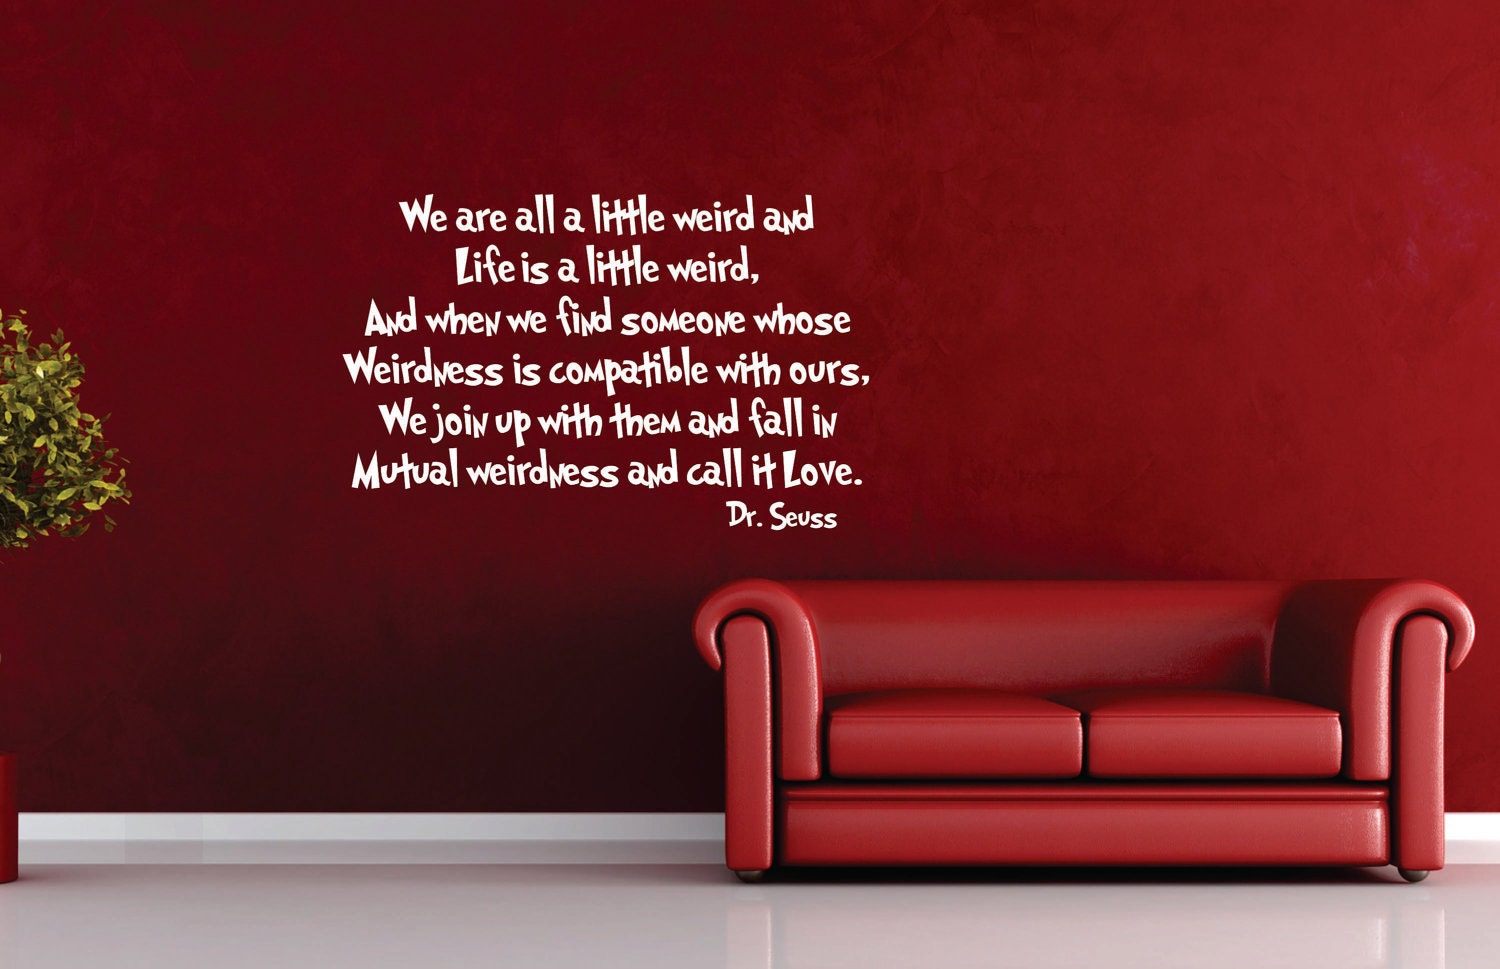 We are all a little weird love poem Removable Vinyl Wall Decal FREE SHIPPING